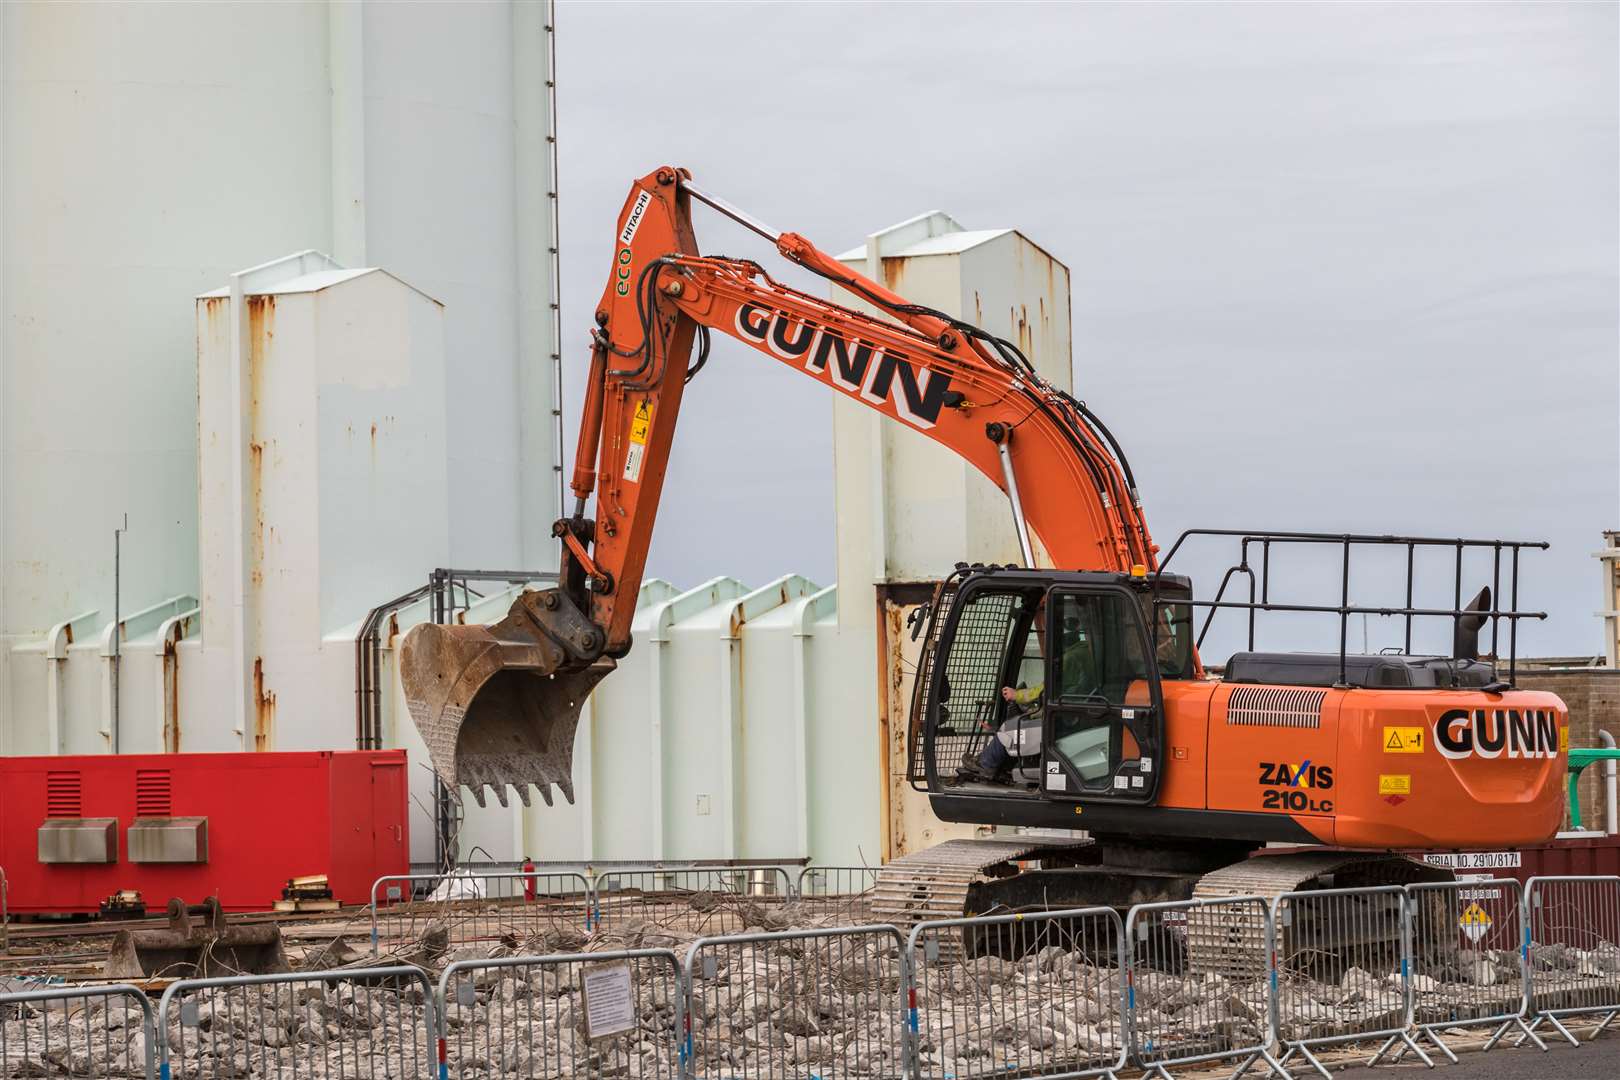 Decommissioning work in progress in December 2017. Picture: Dounreay (a division of Magnox) and NDA